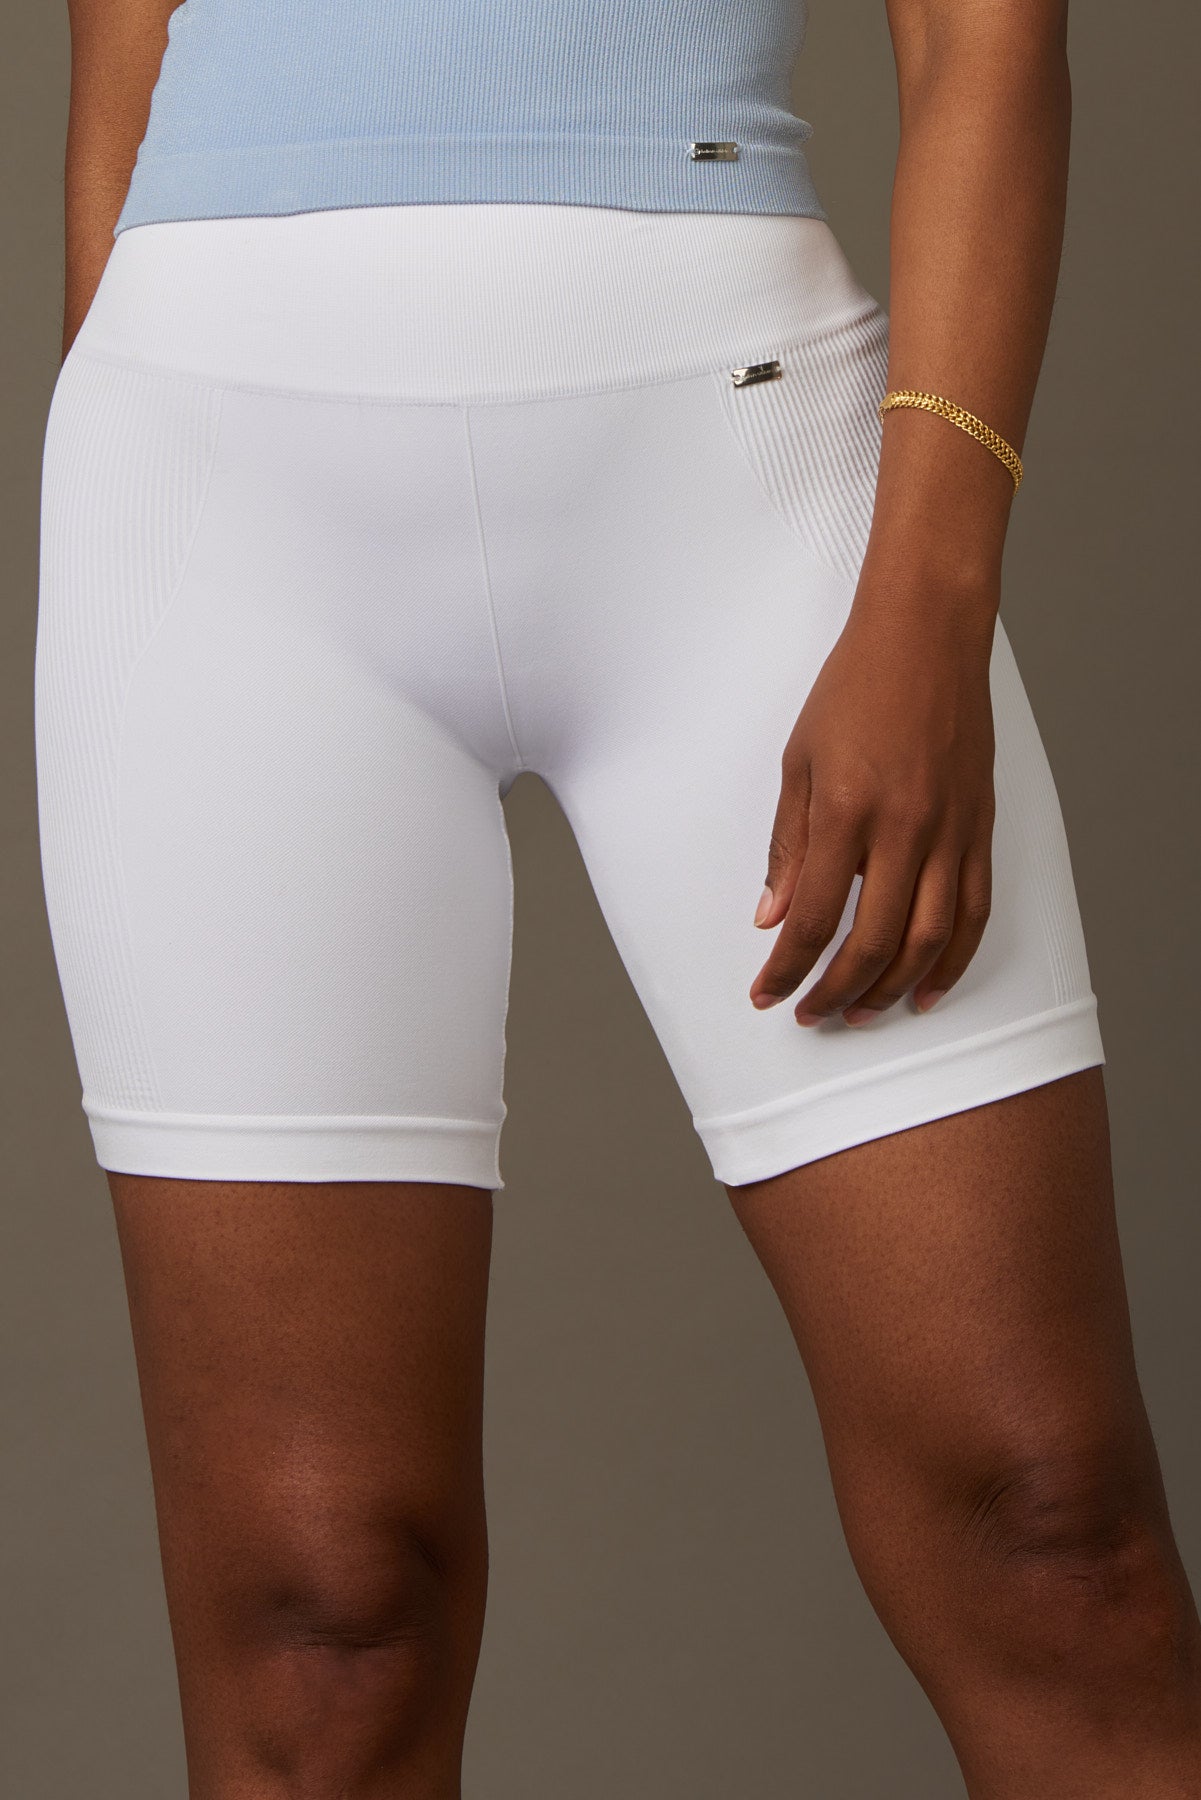 Bliss Biker in White-Bikers-Shop Clothing Sustainable Recycled Yoga Leggings Women On-line Barcelona Believe Athletics Sustainable Recycled Yoga Clothes